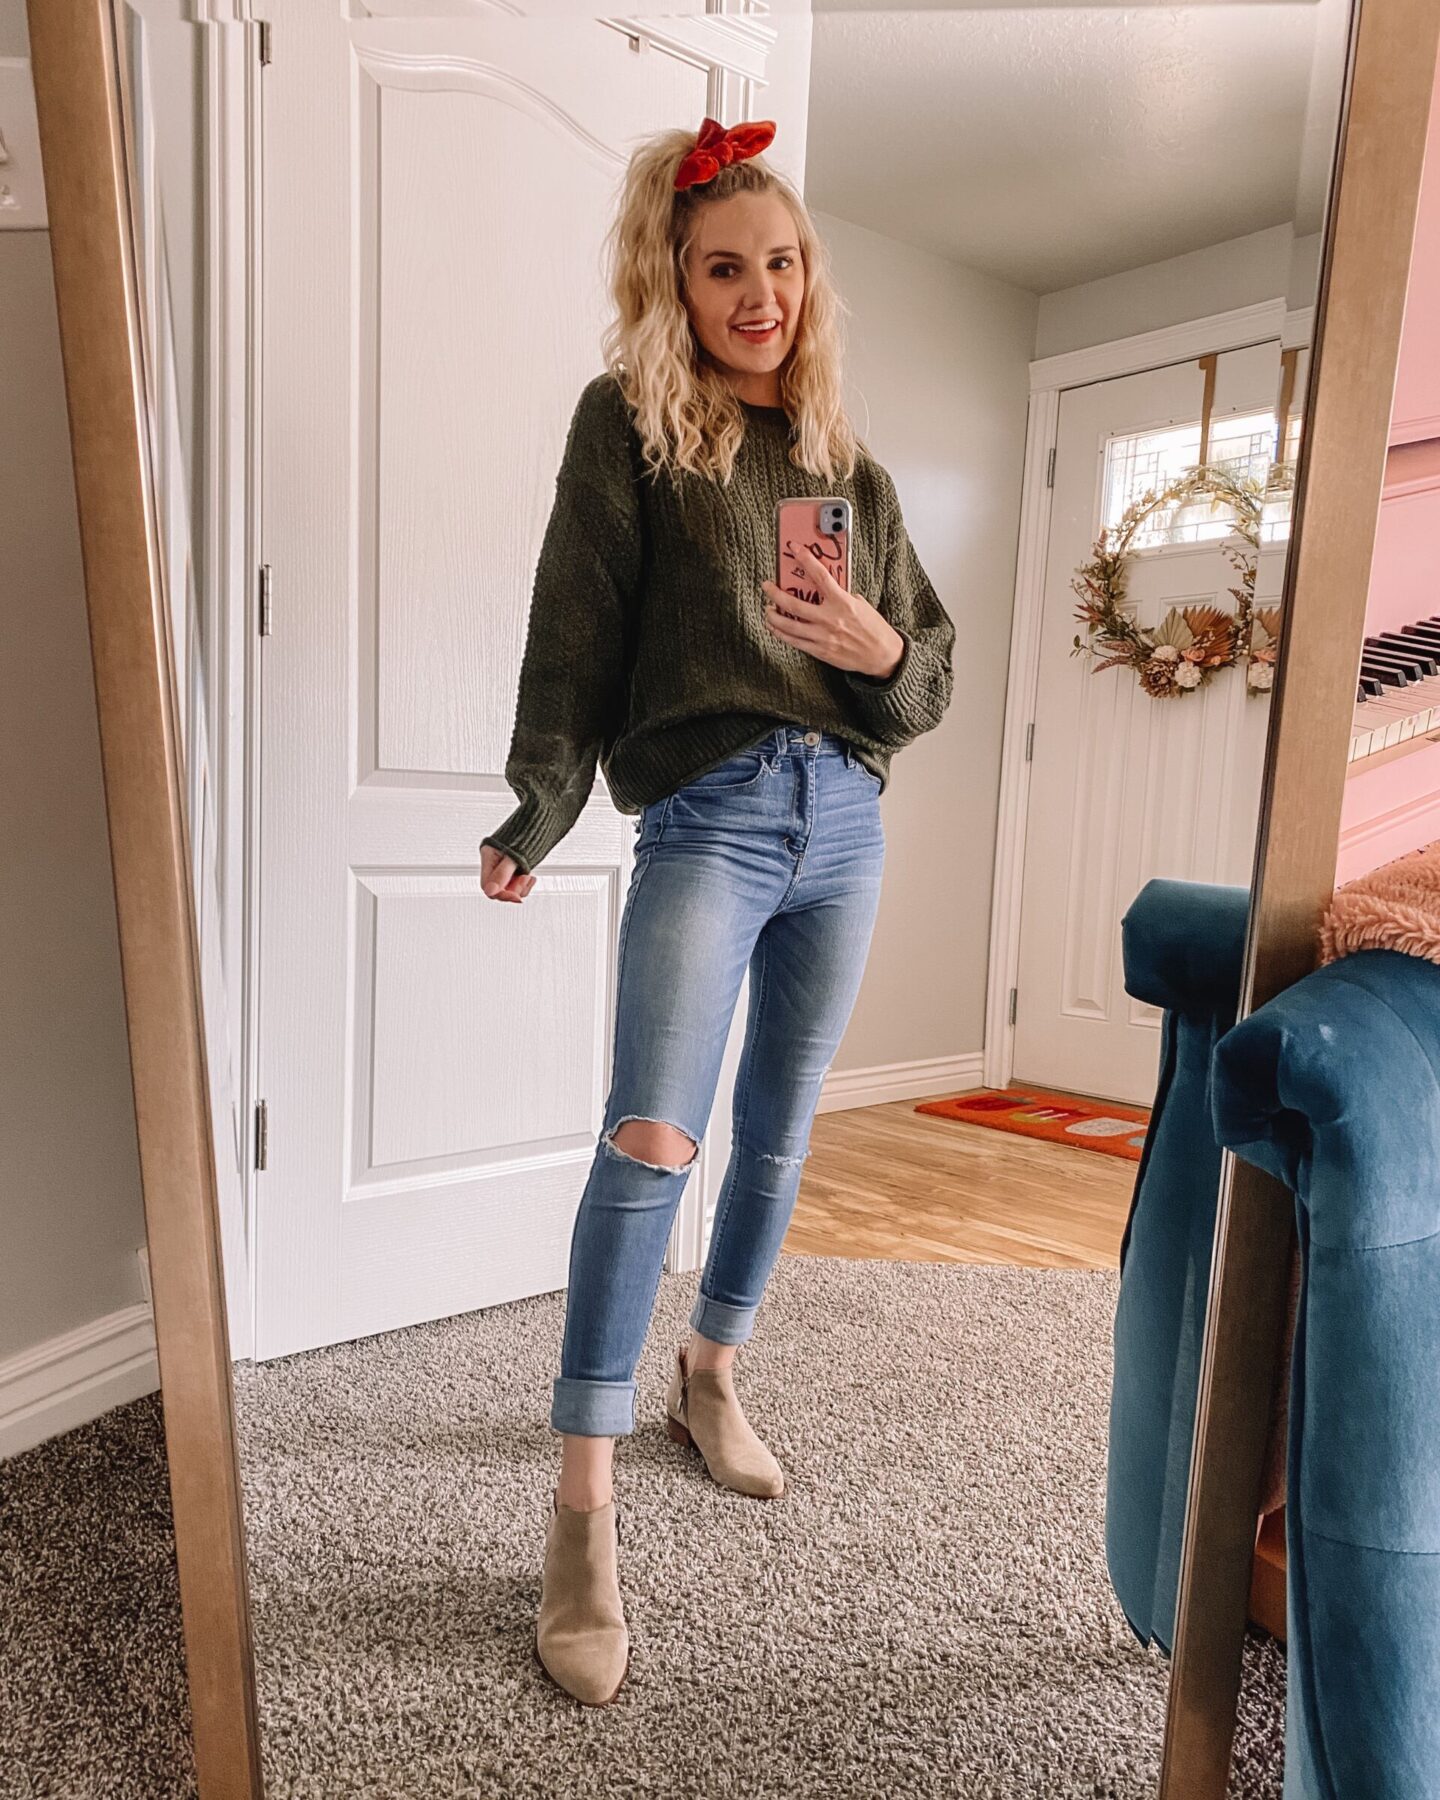 THE BEST OF TARGET FASHION – FALL SWEATERS + MORE